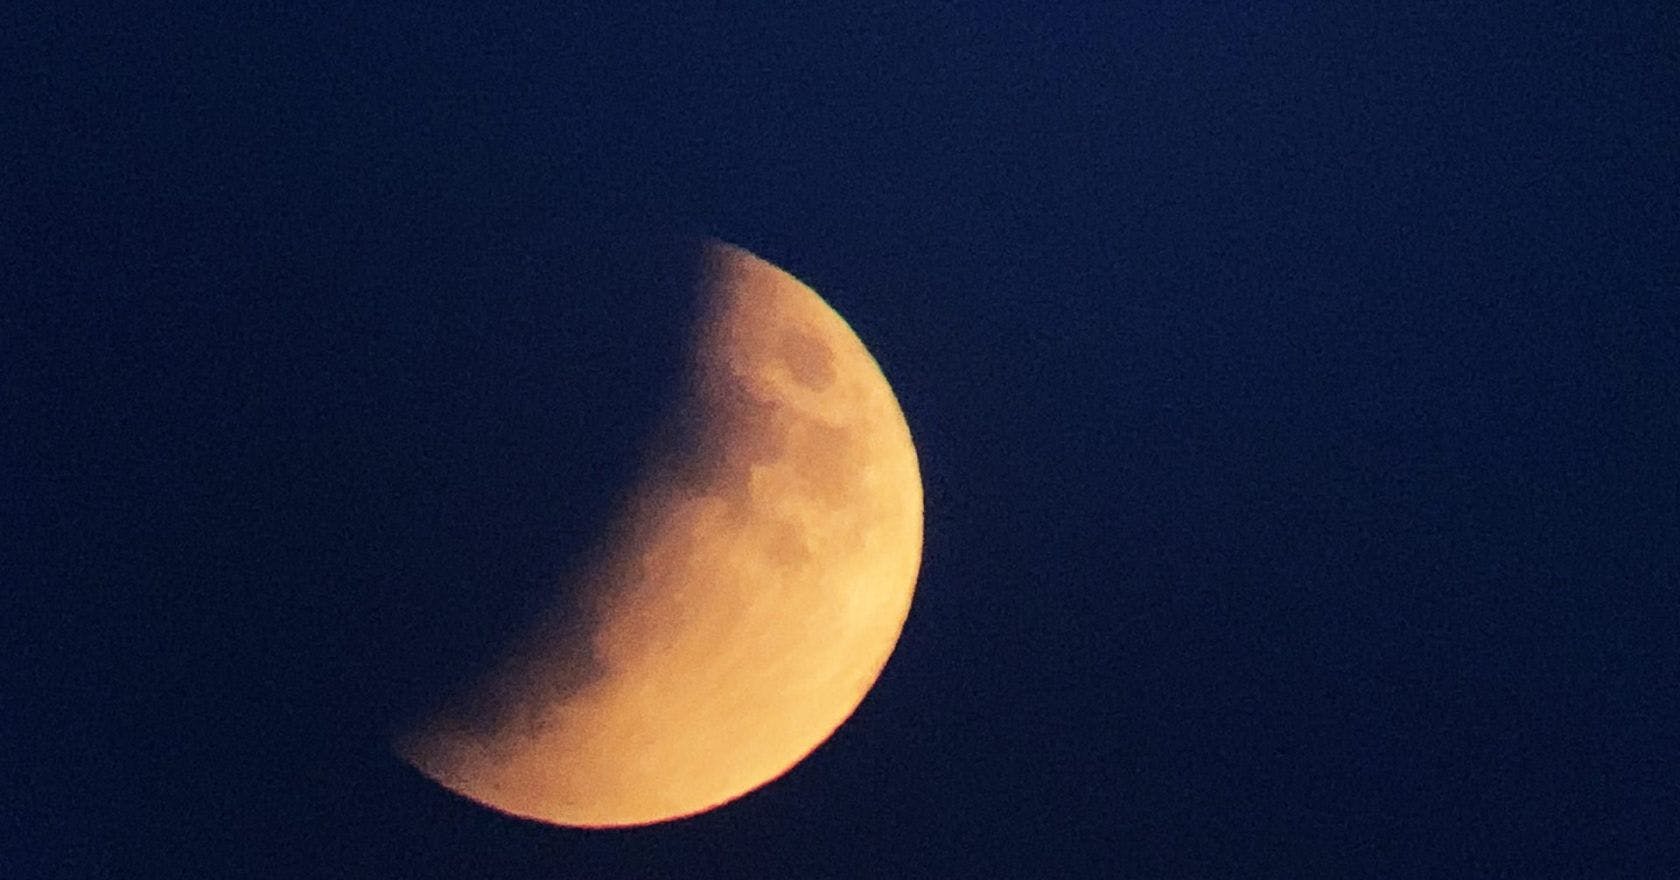 Penumbral lunar eclipse unraveling the last eclipse of 2020